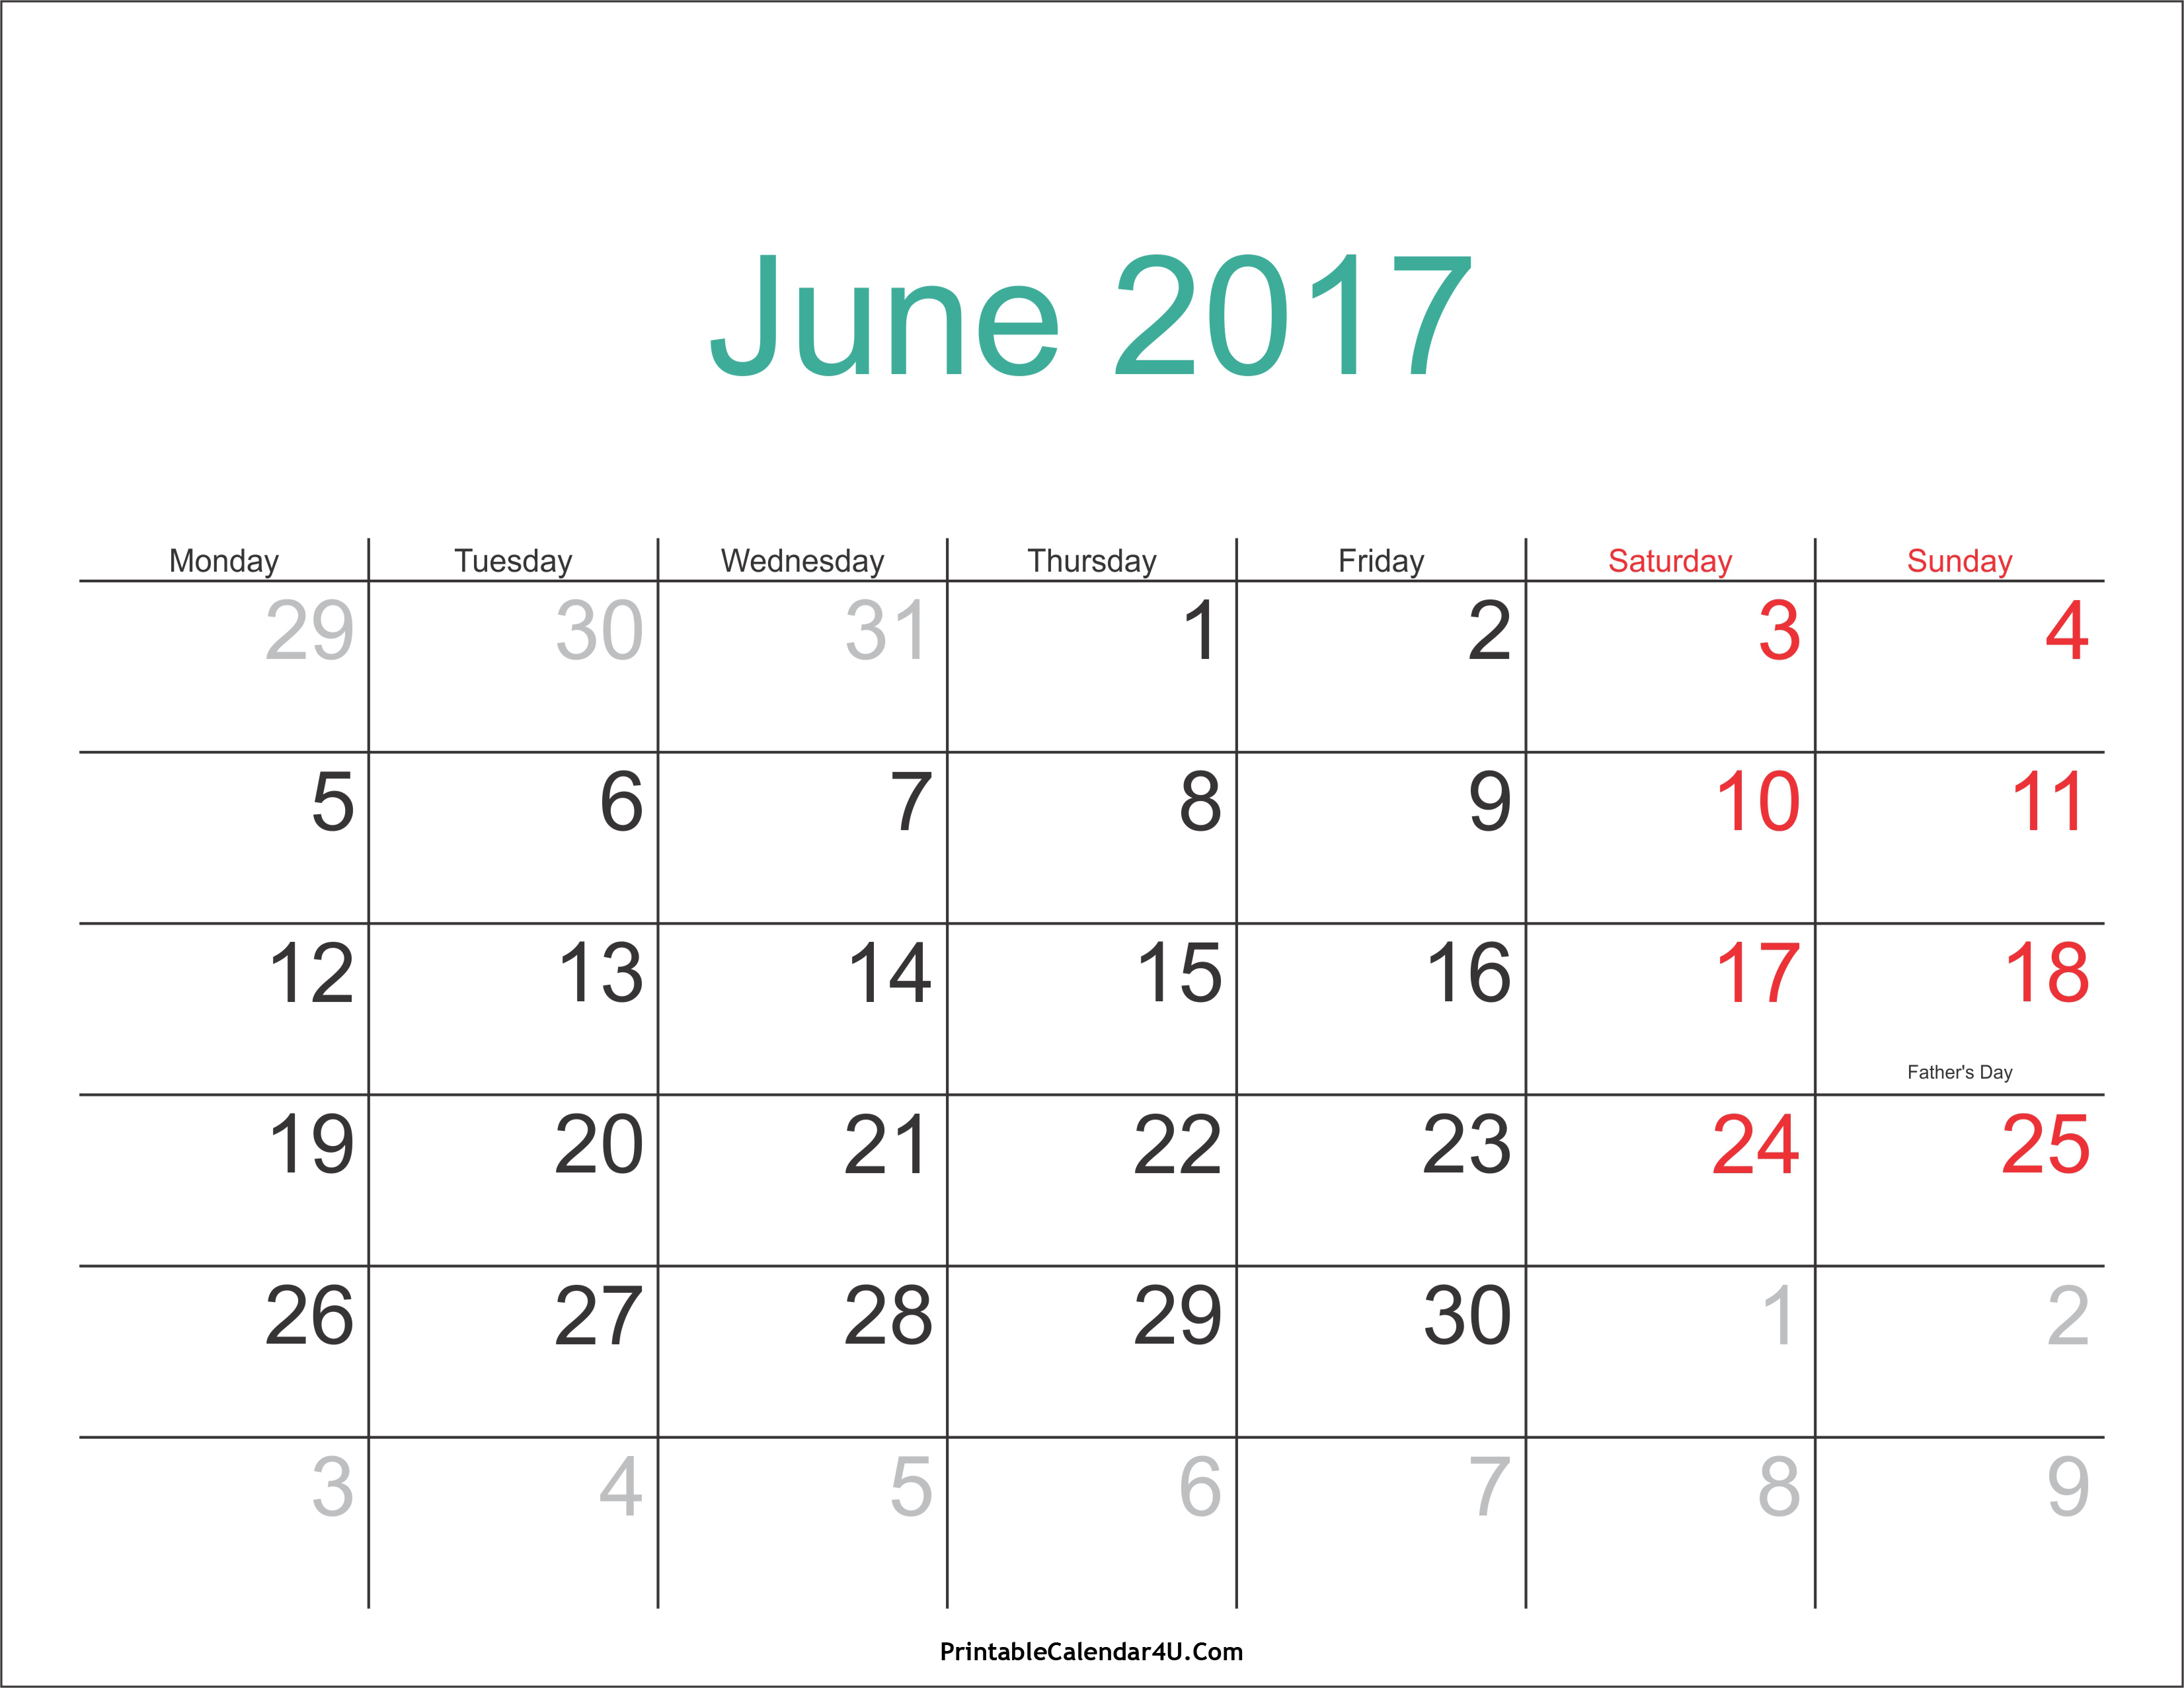 June 2017 Calendar Printable with Holidays PDF and 